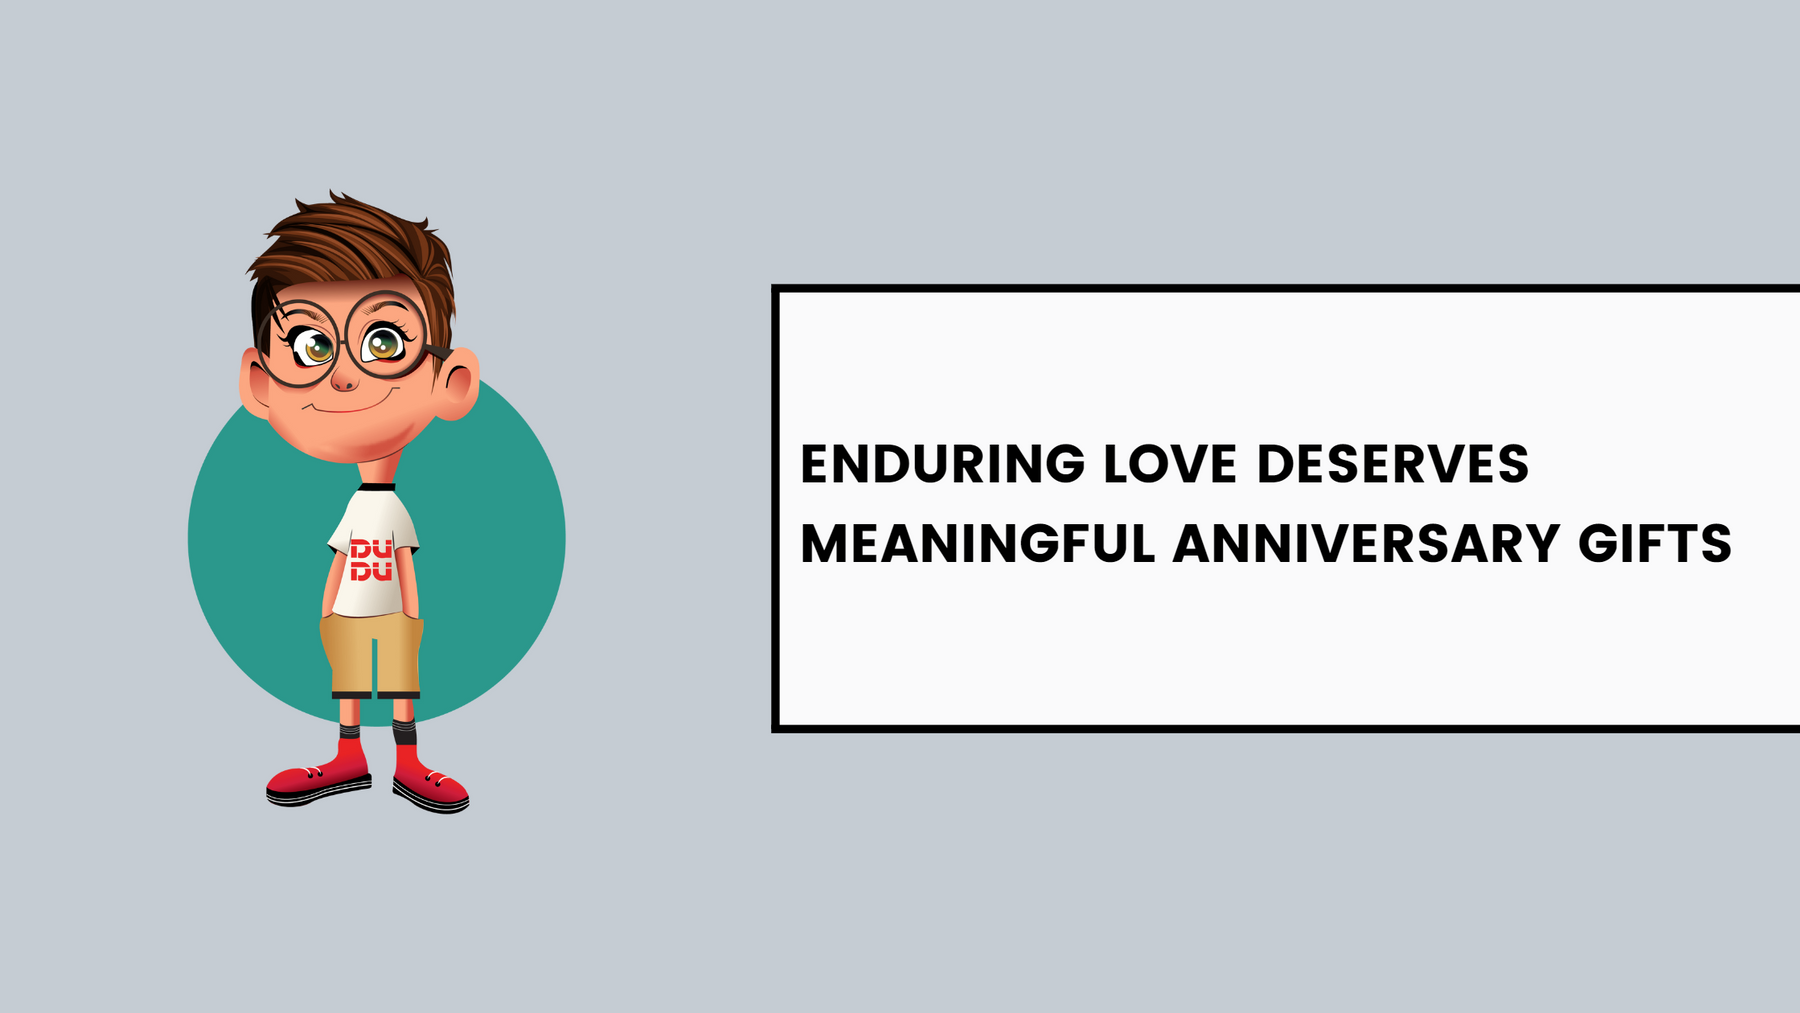 Enduring Love Deserves Meaningful Anniversary Gifts